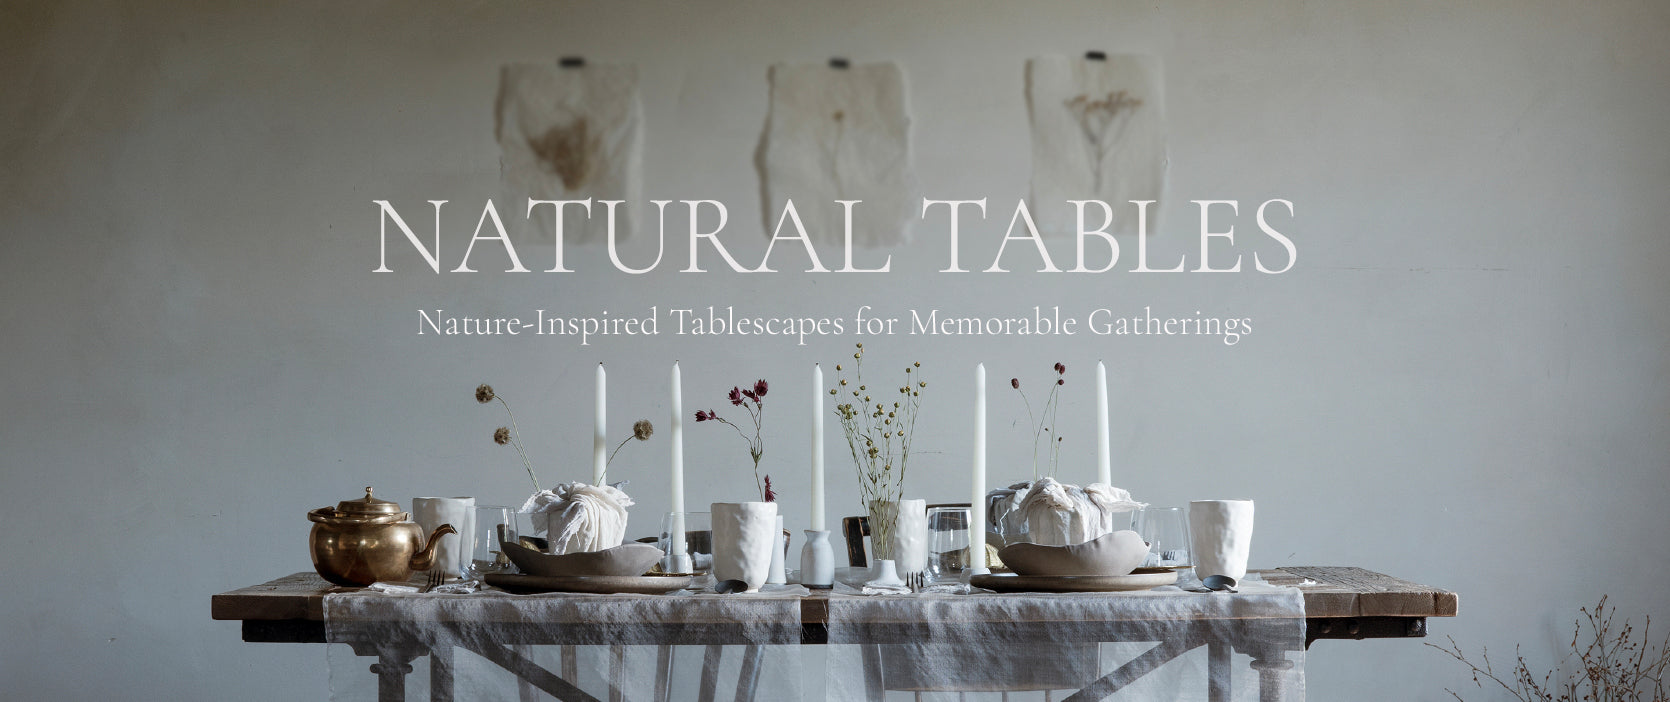 My book NATURAL TABLES